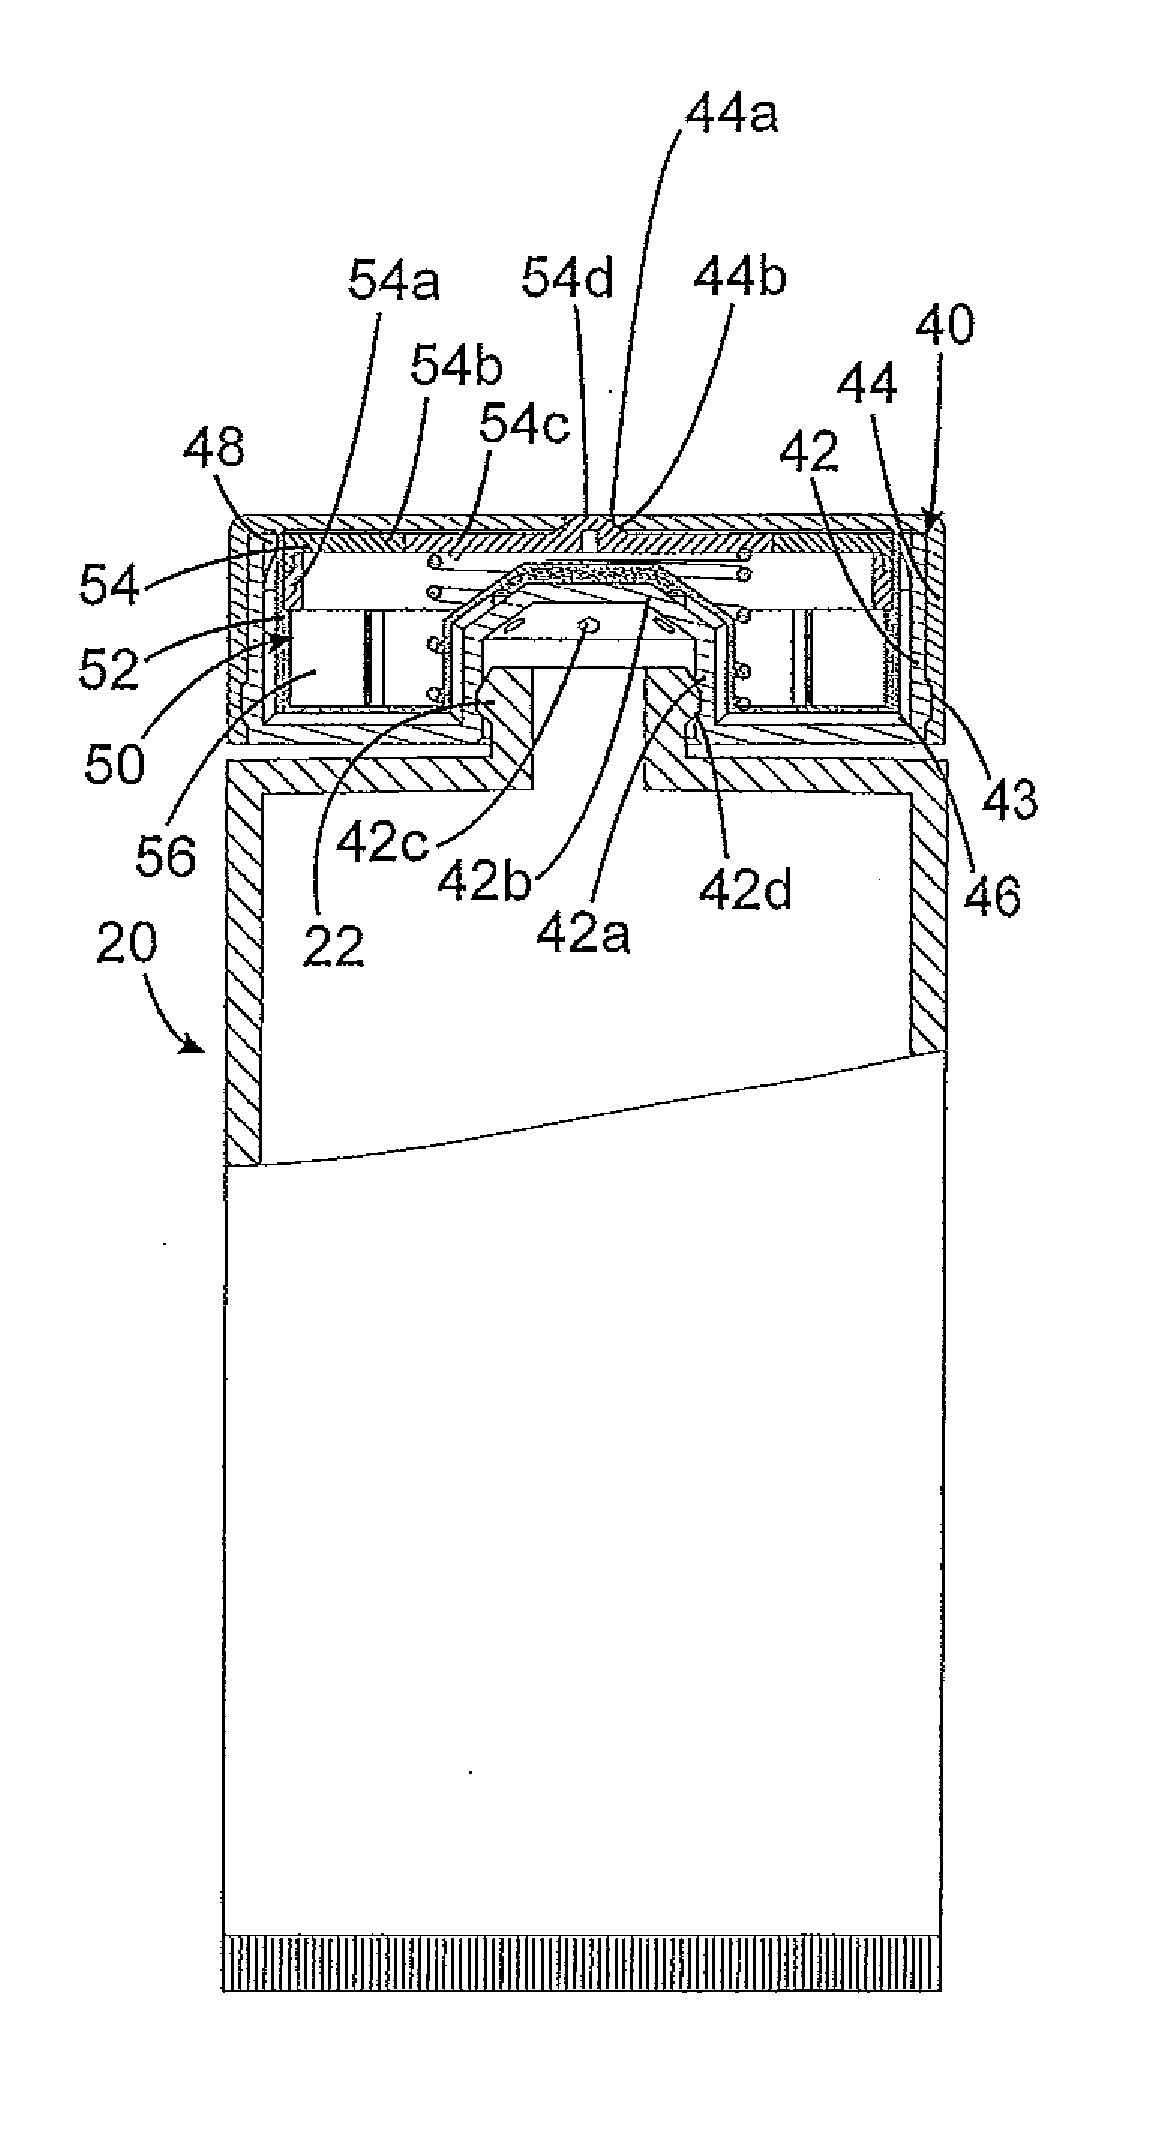 Dispensing head for a tube and tube having a dispensing head